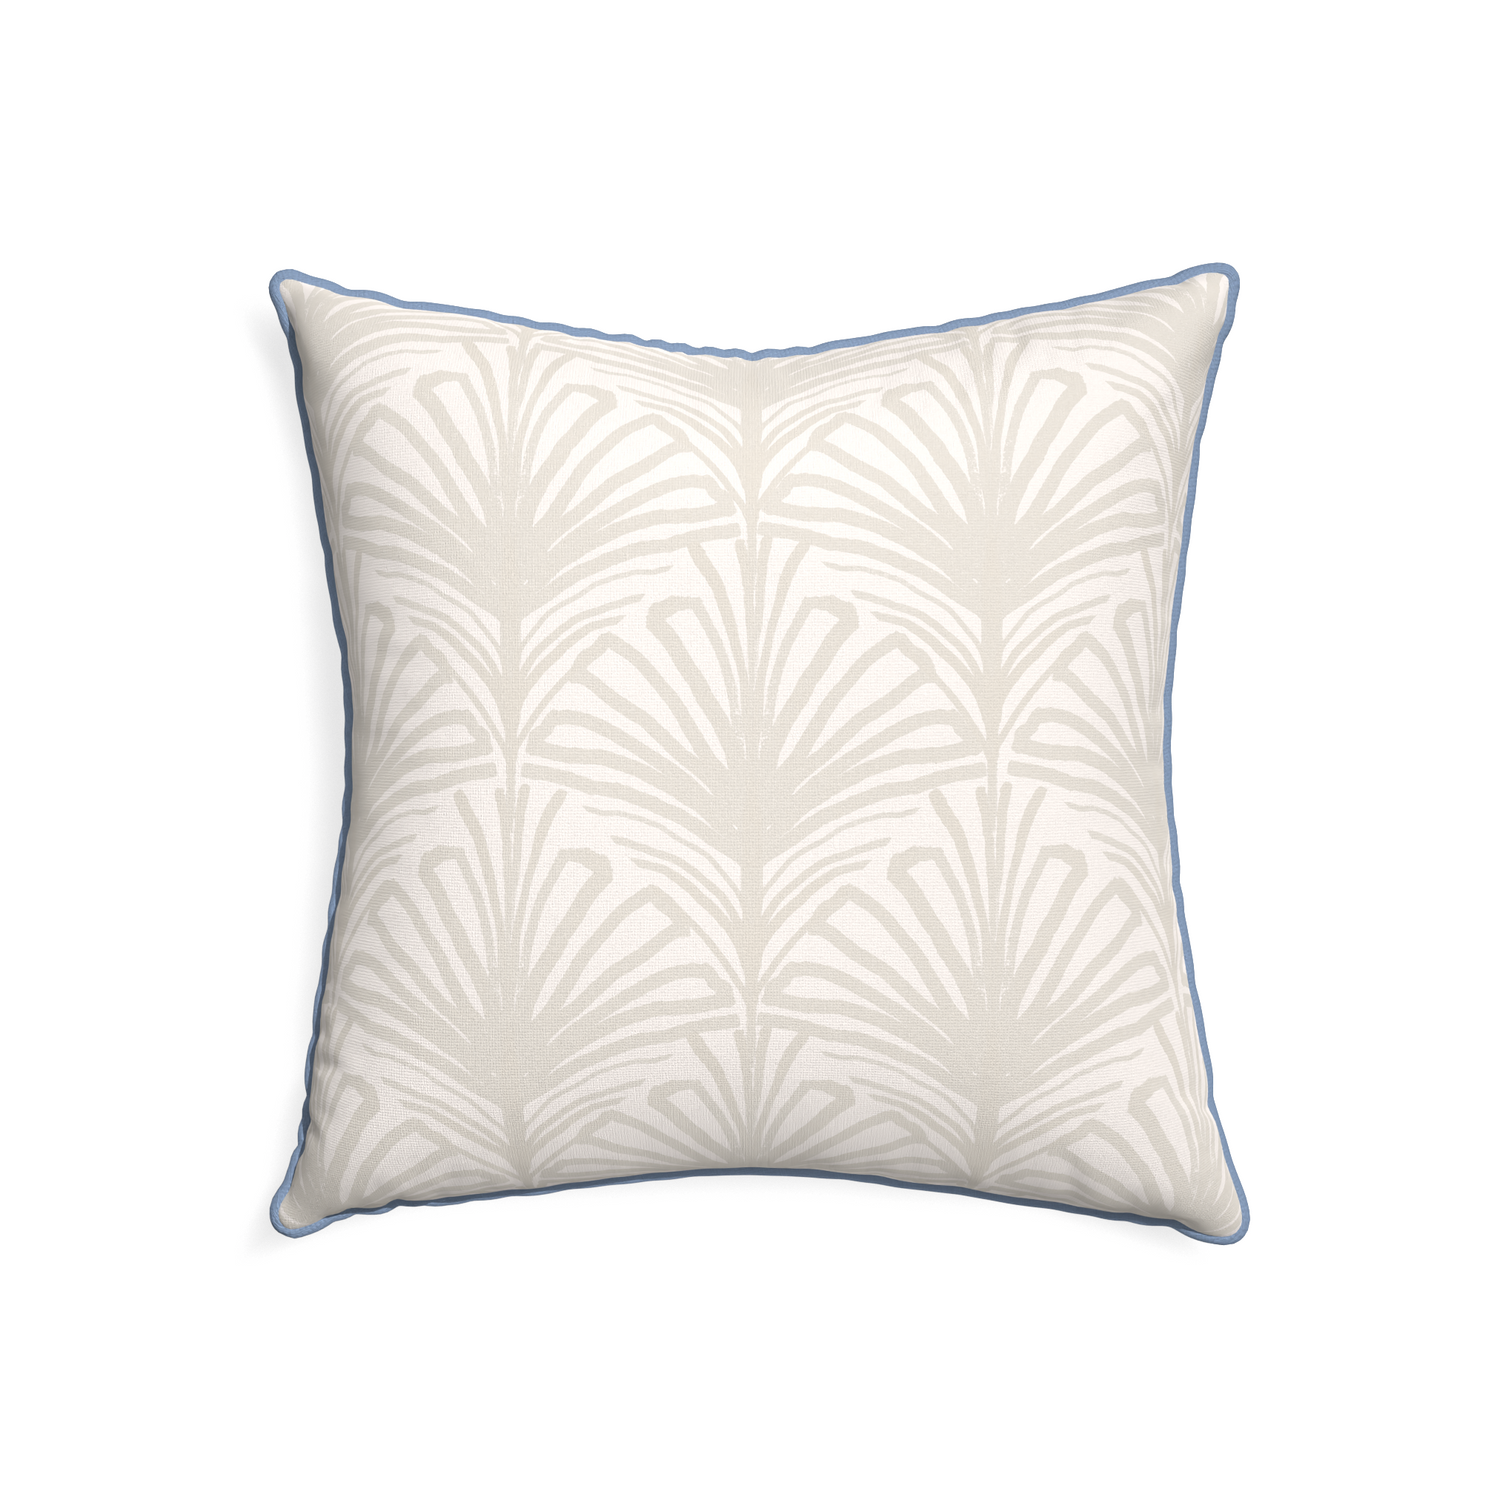 22-square suzy sand custom pillow with sky piping on white background